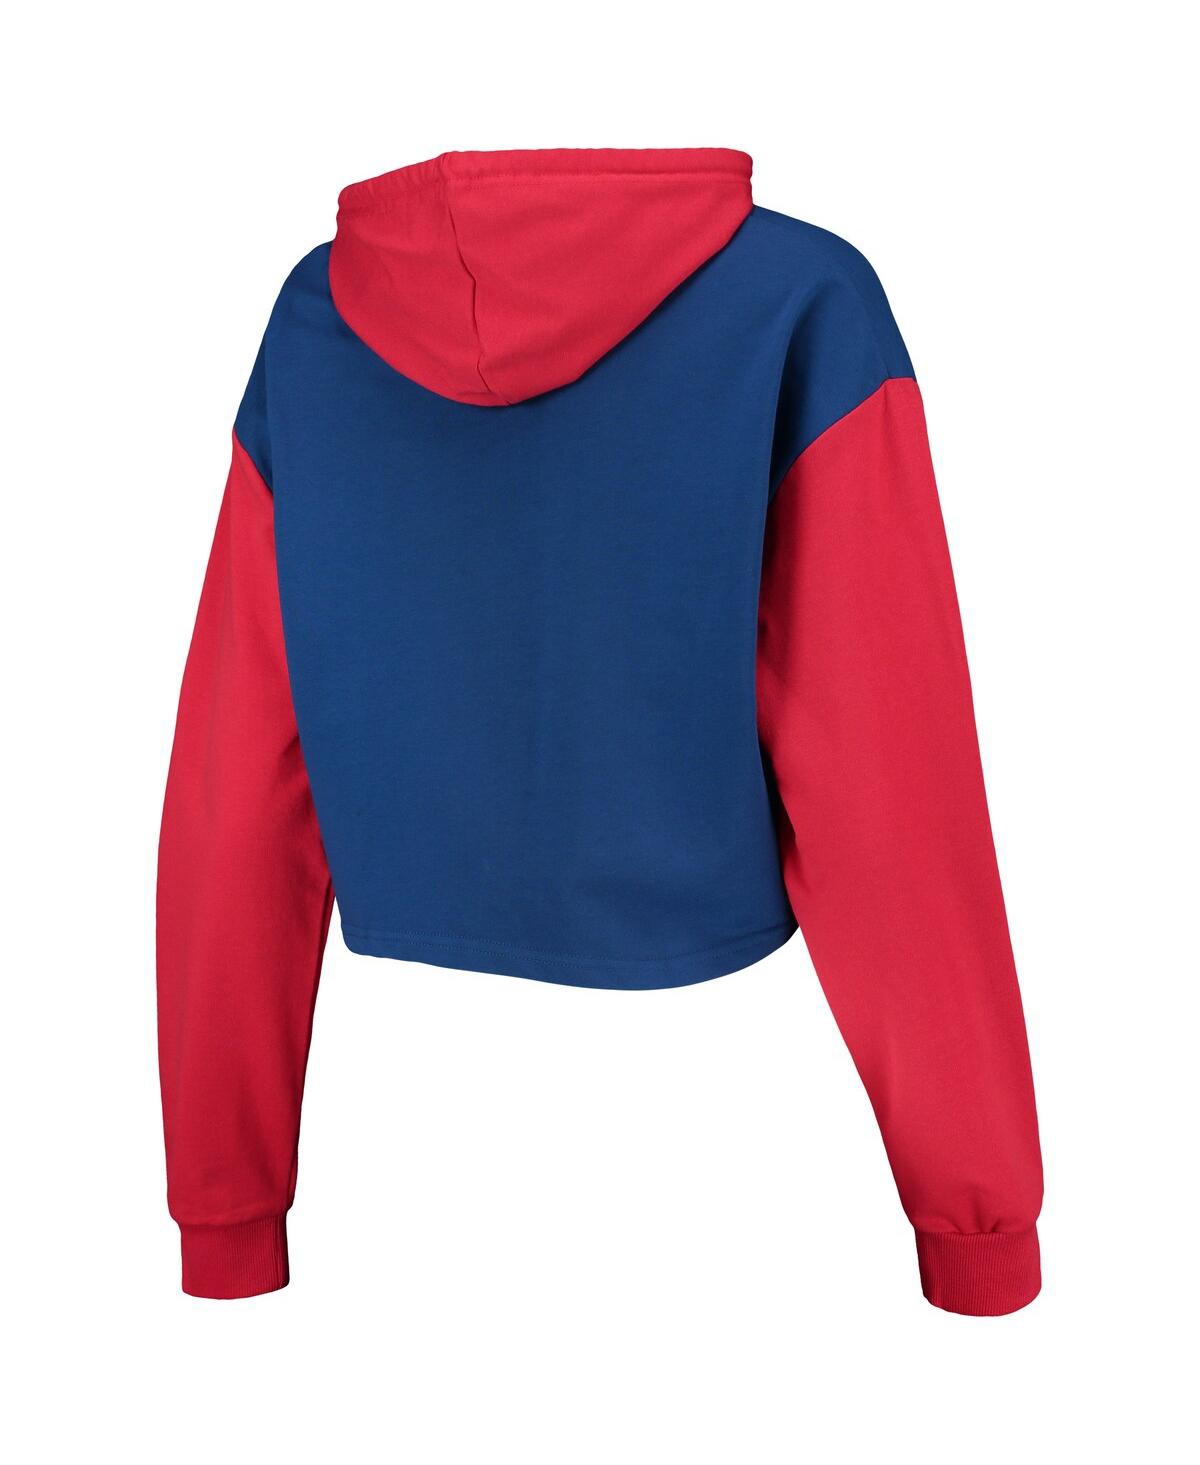 Shop Foco Women's  Royal, Red Chicago Cubs Color-block Pullover Hoodie And Shorts Lounge Set In Royal,red